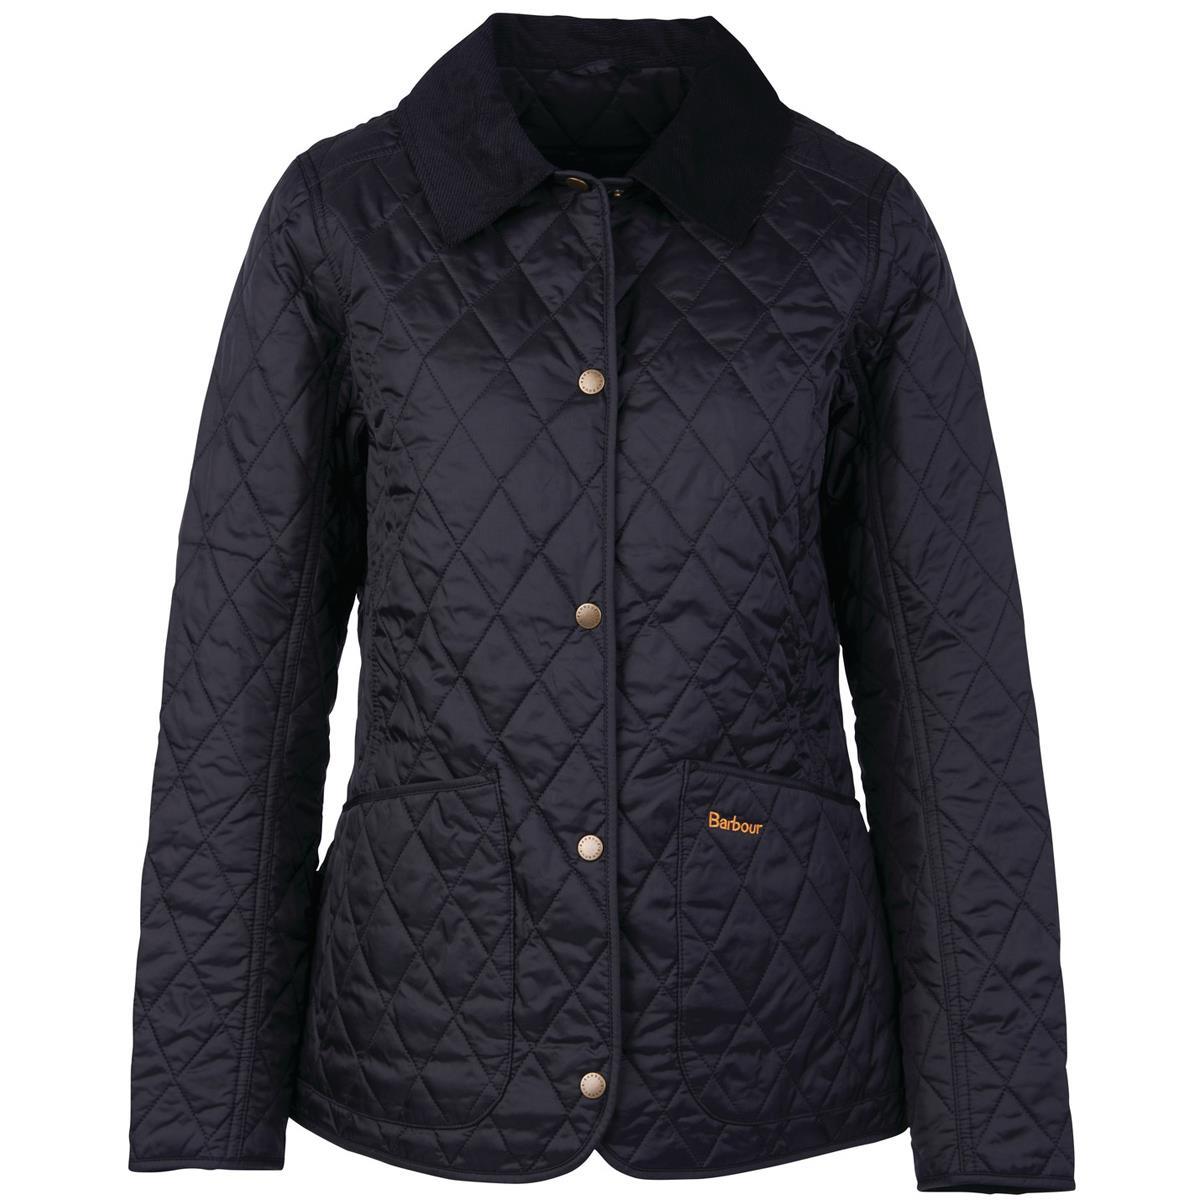 What are the specs of the Barbour Annandale Quilted Jacket?